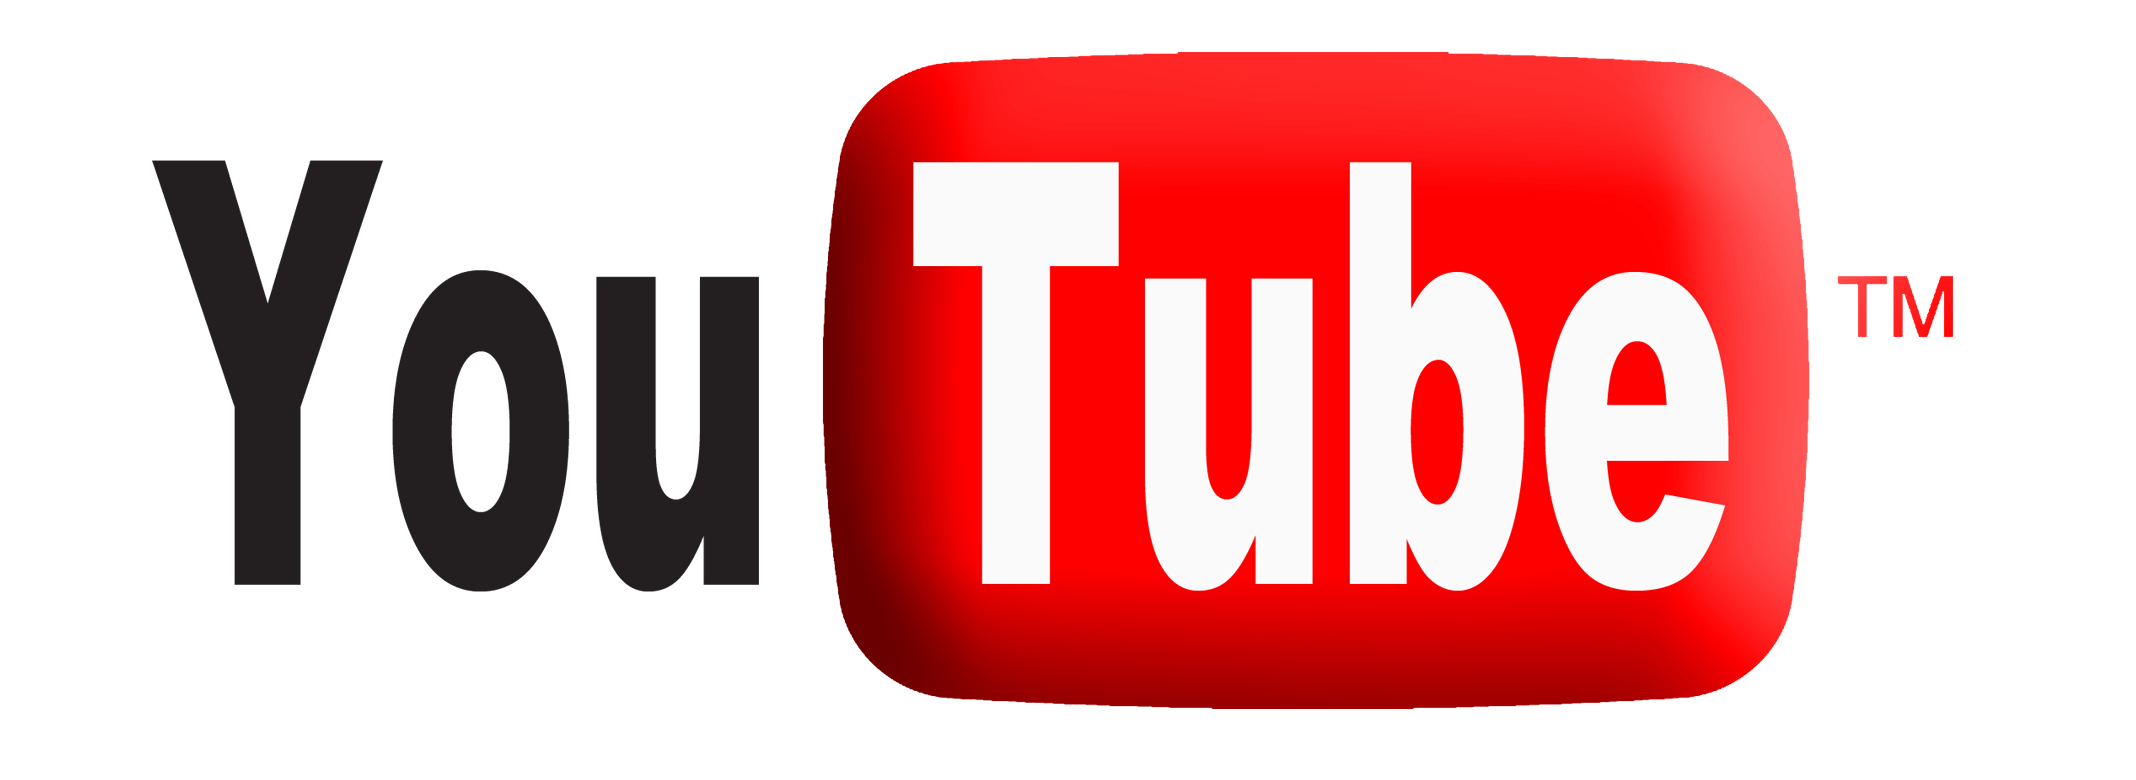 Yoututbe Logo - Youtube PNG images free download